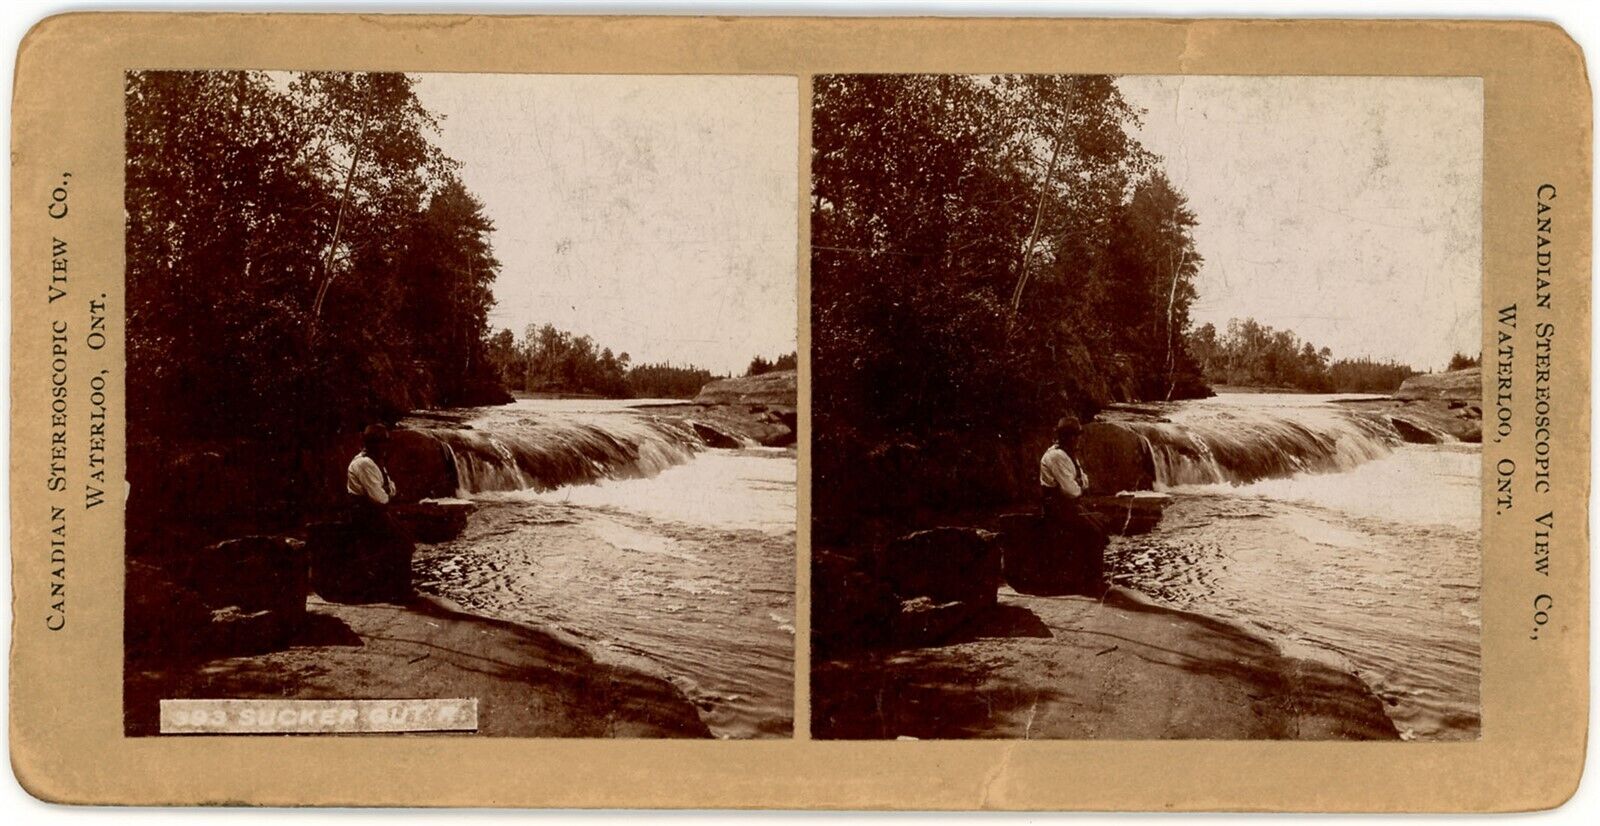 CANADA SV - Ontario - Temagami - Sucker Gut River - Canadian Stereo View Co